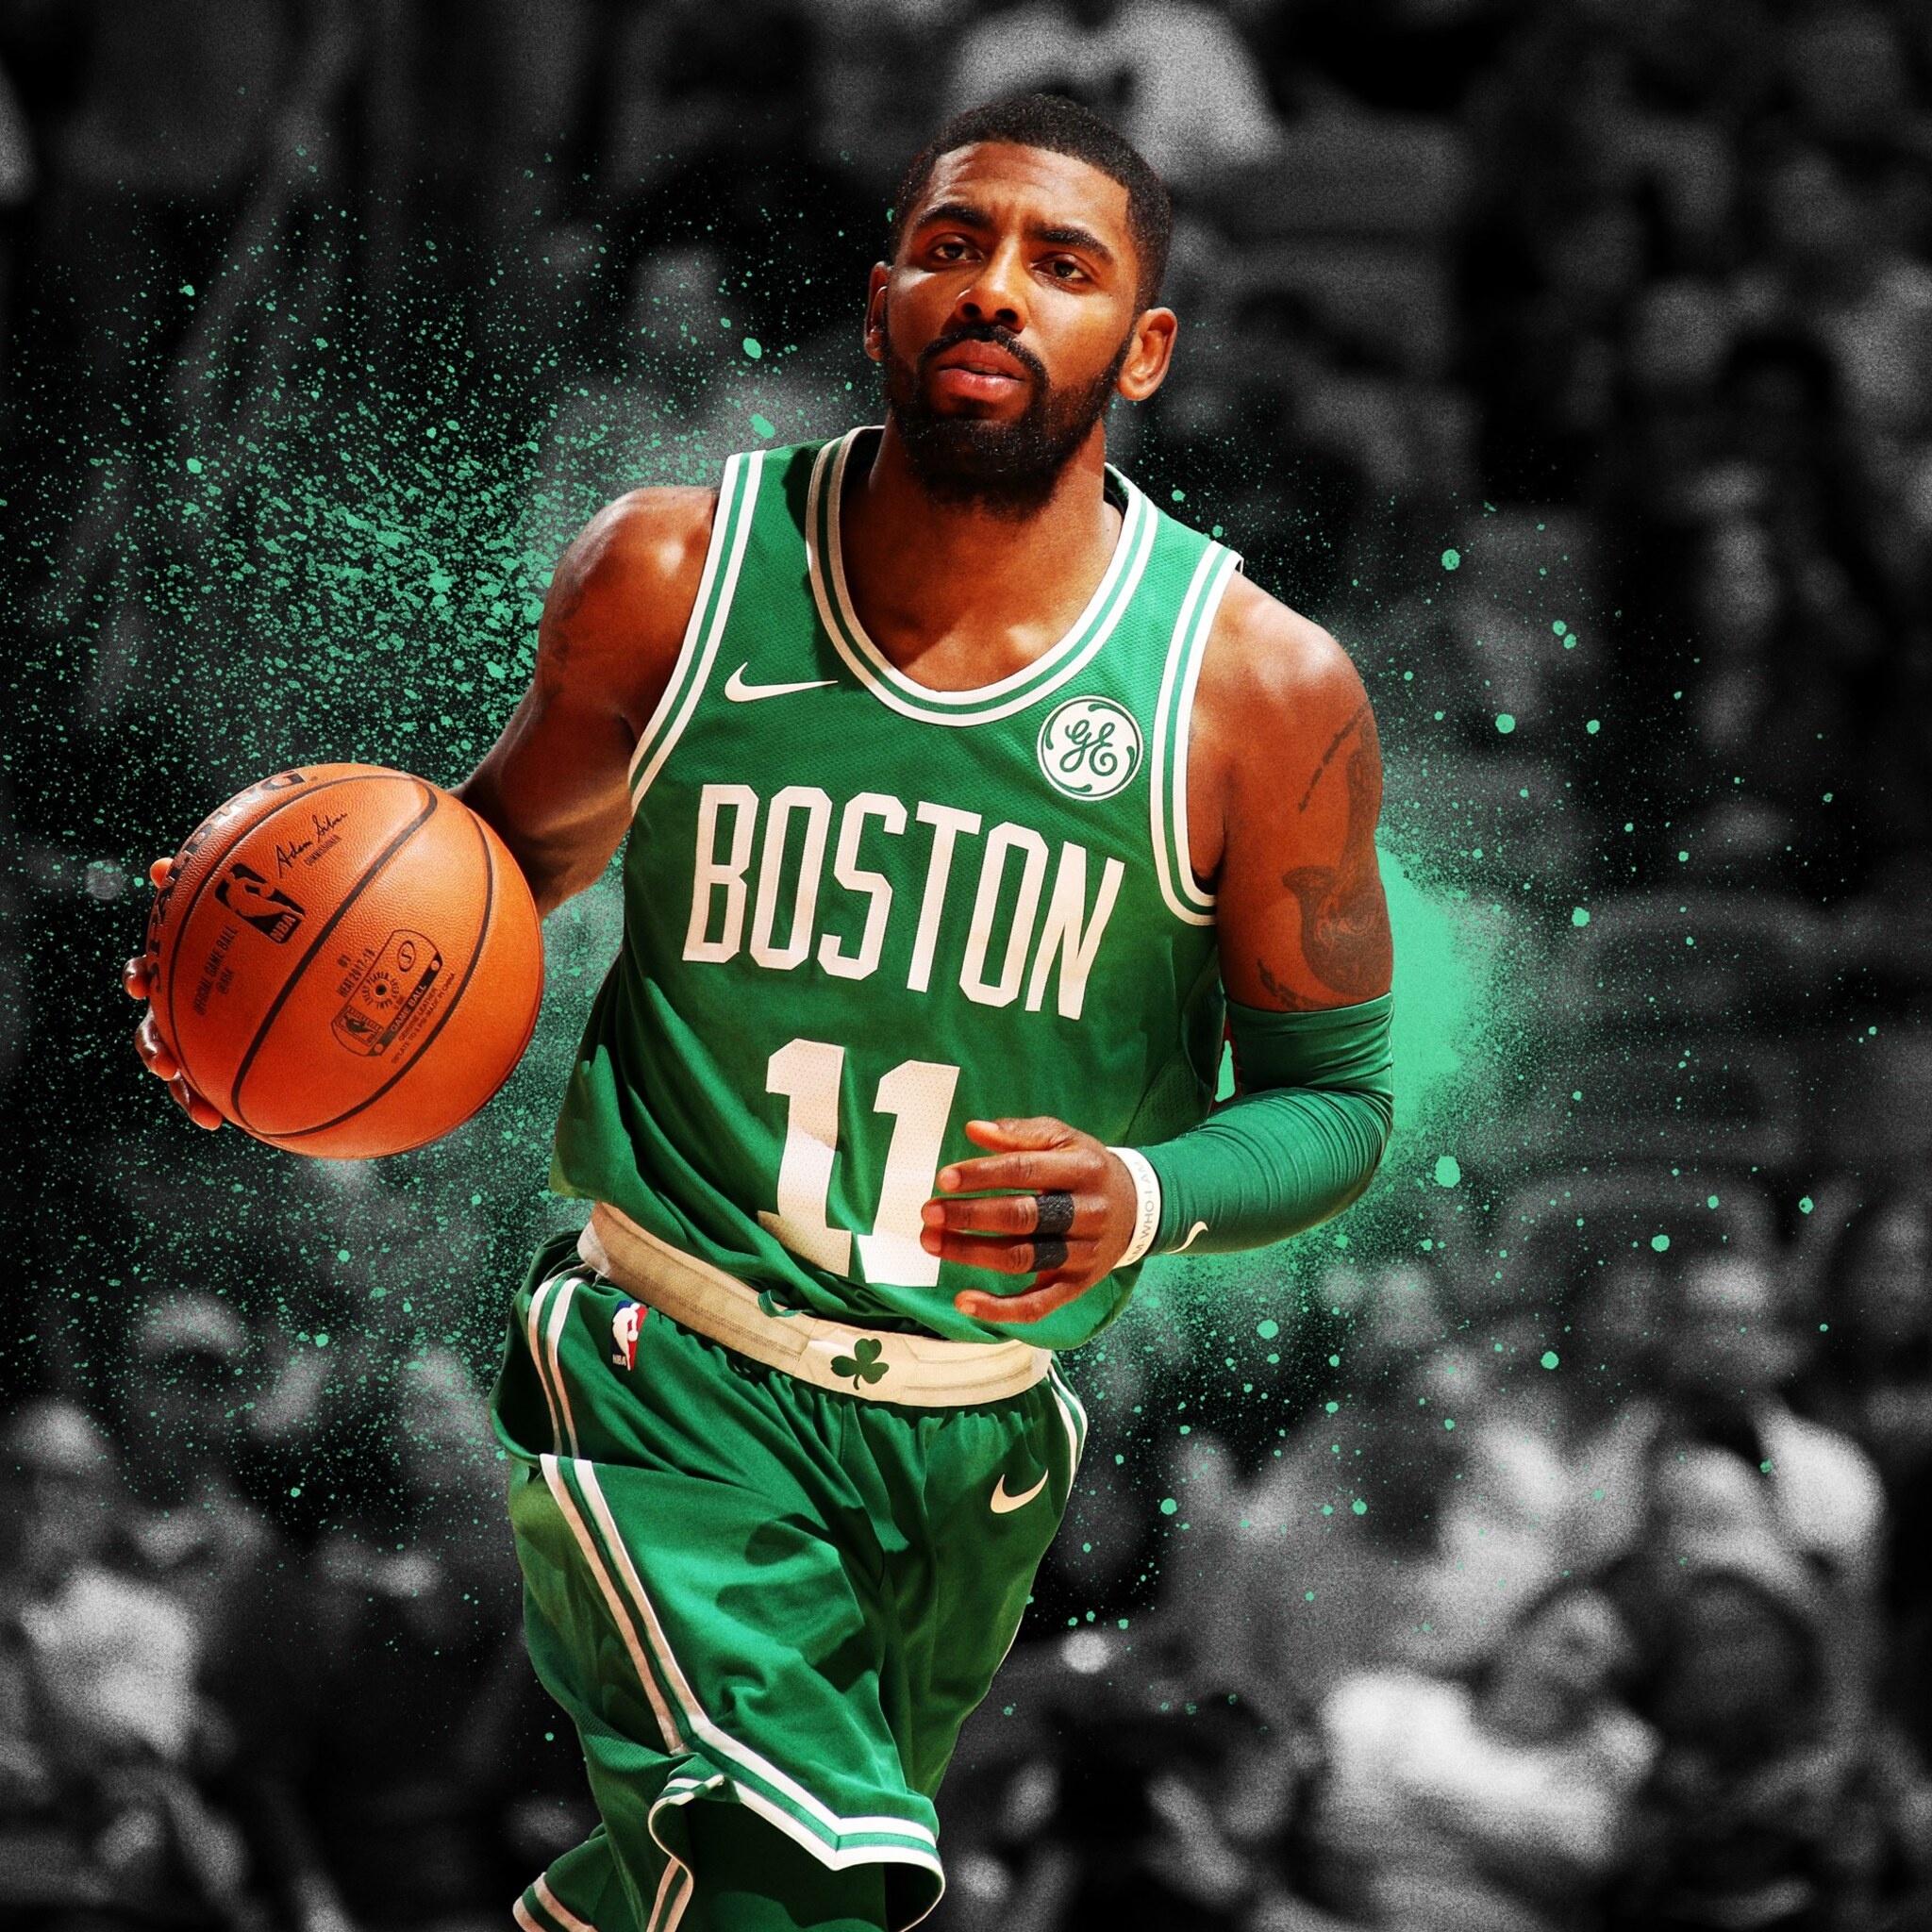 Boston Celtics, Kyrie Irving, iPad Air wallpapers, Player images, 2050x2050 HD Phone